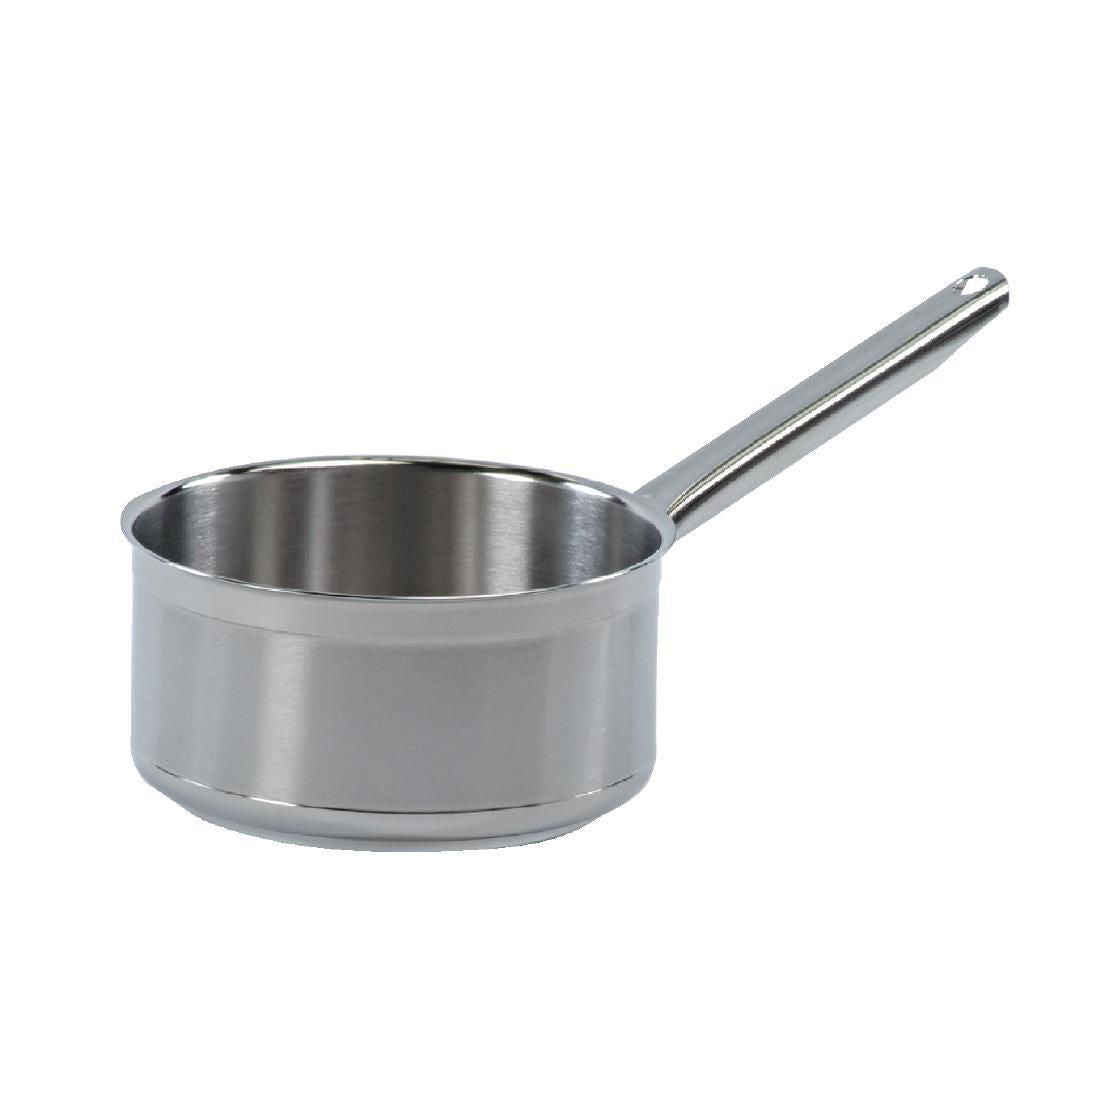 Bourgeat Tradition Plus Stainless Steel Saucepan 2.4Ltr JD Catering Equipment Solutions Ltd